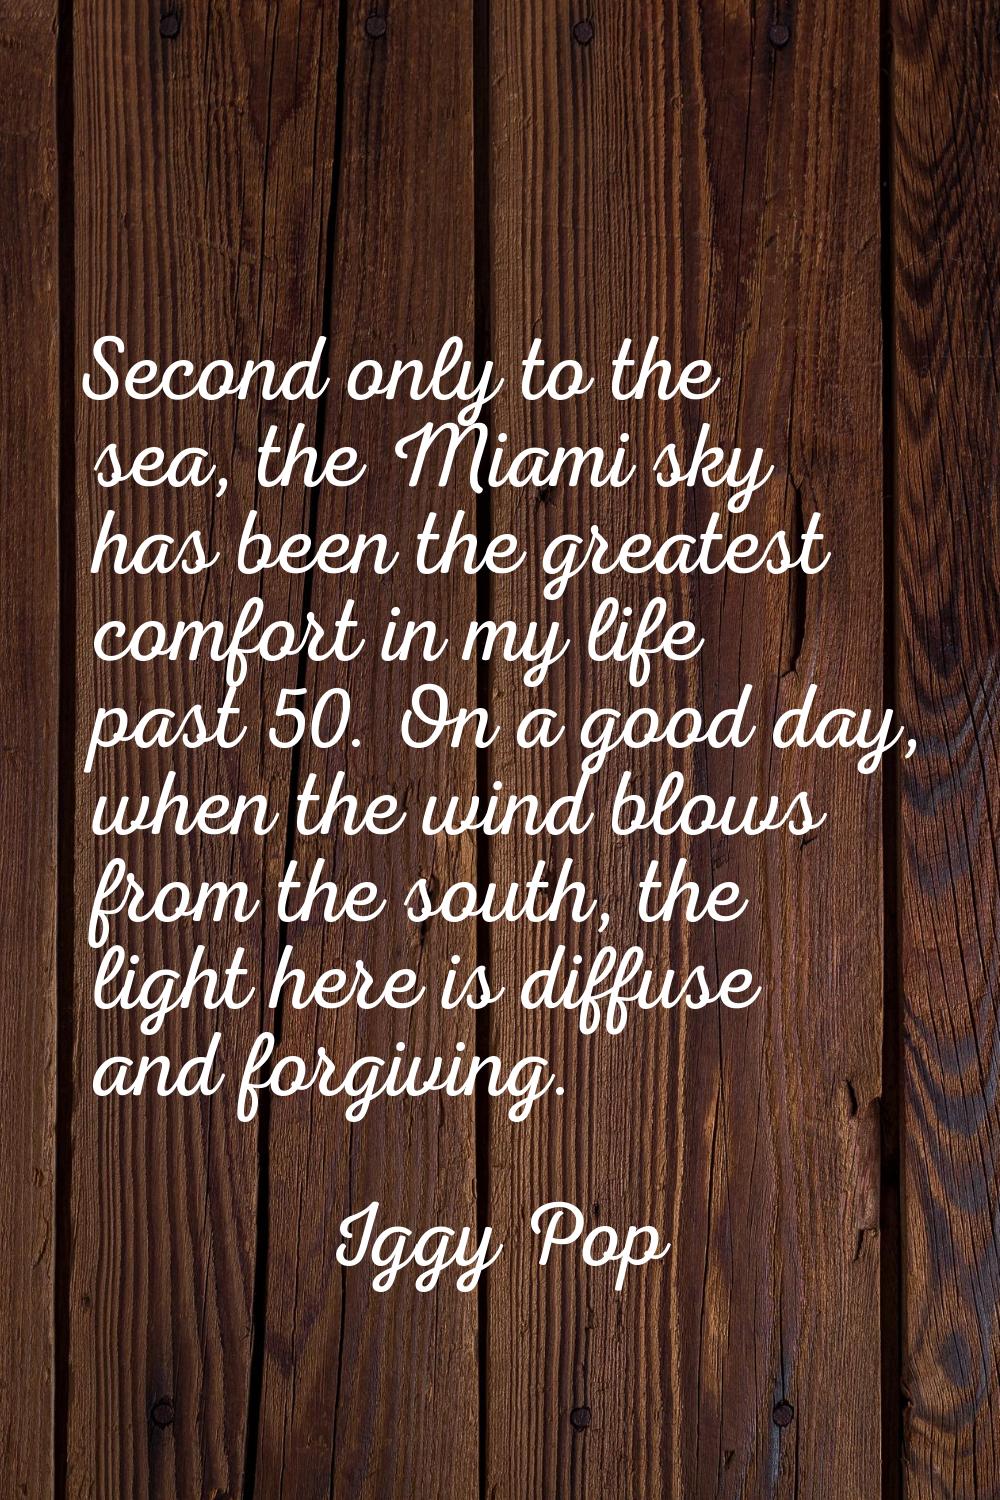 Second only to the sea, the Miami sky has been the greatest comfort in my life past 50. On a good d